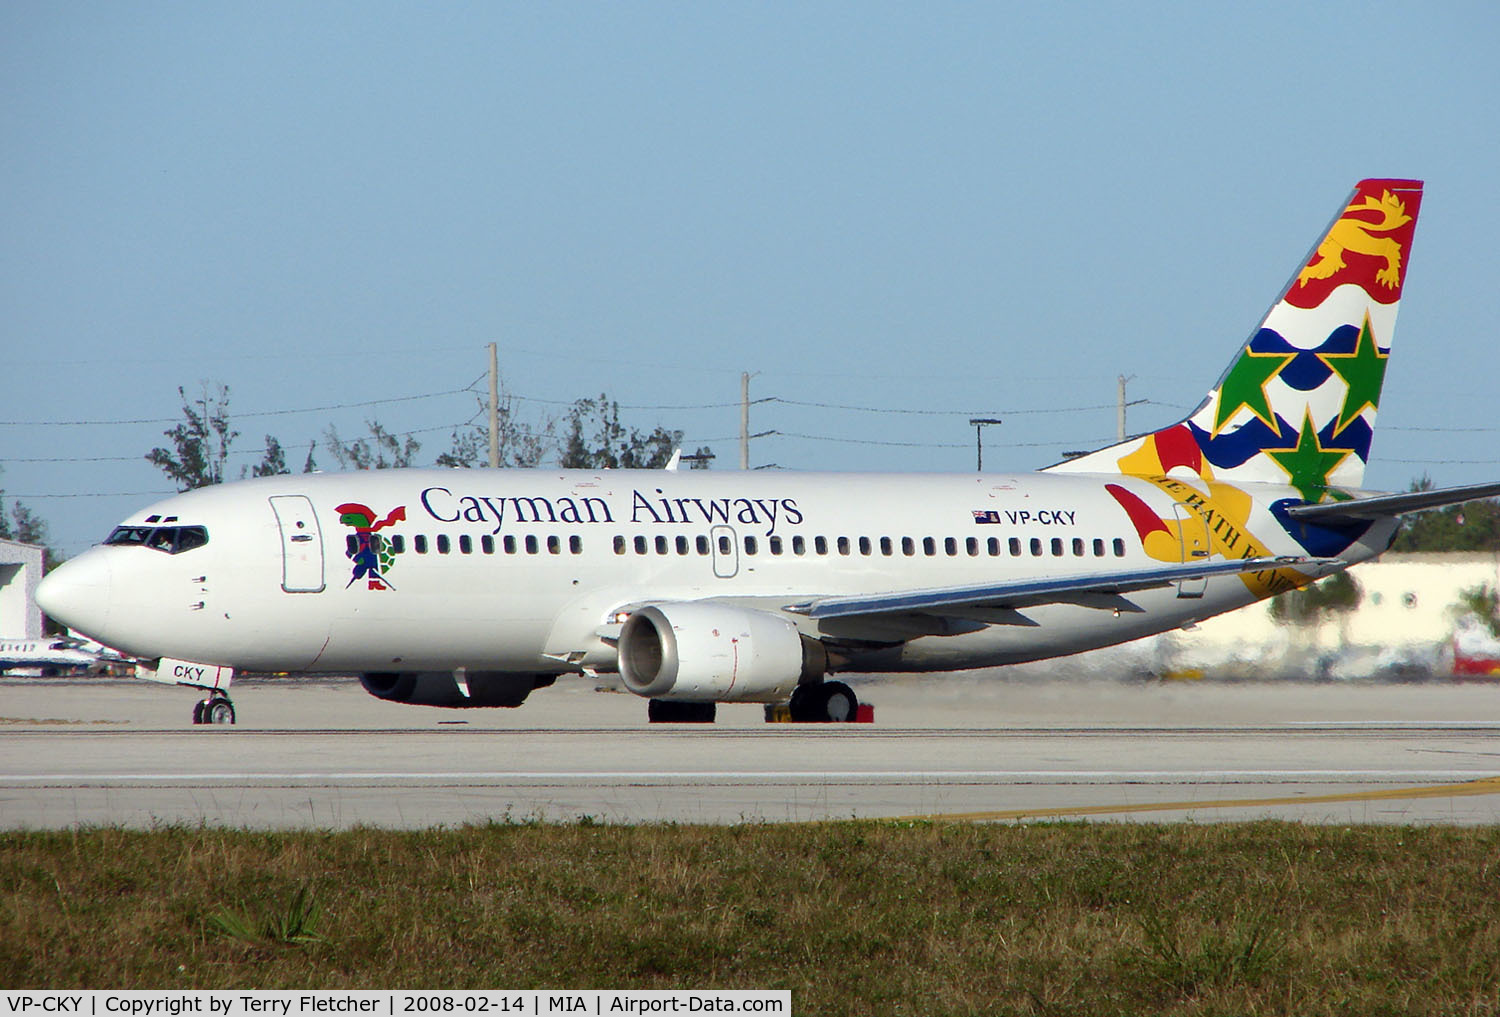 VP-CKY, 1992 Boeing 737-3Q8 C/N 26282, This colouful B737 previously operated in Australia and Polynesia